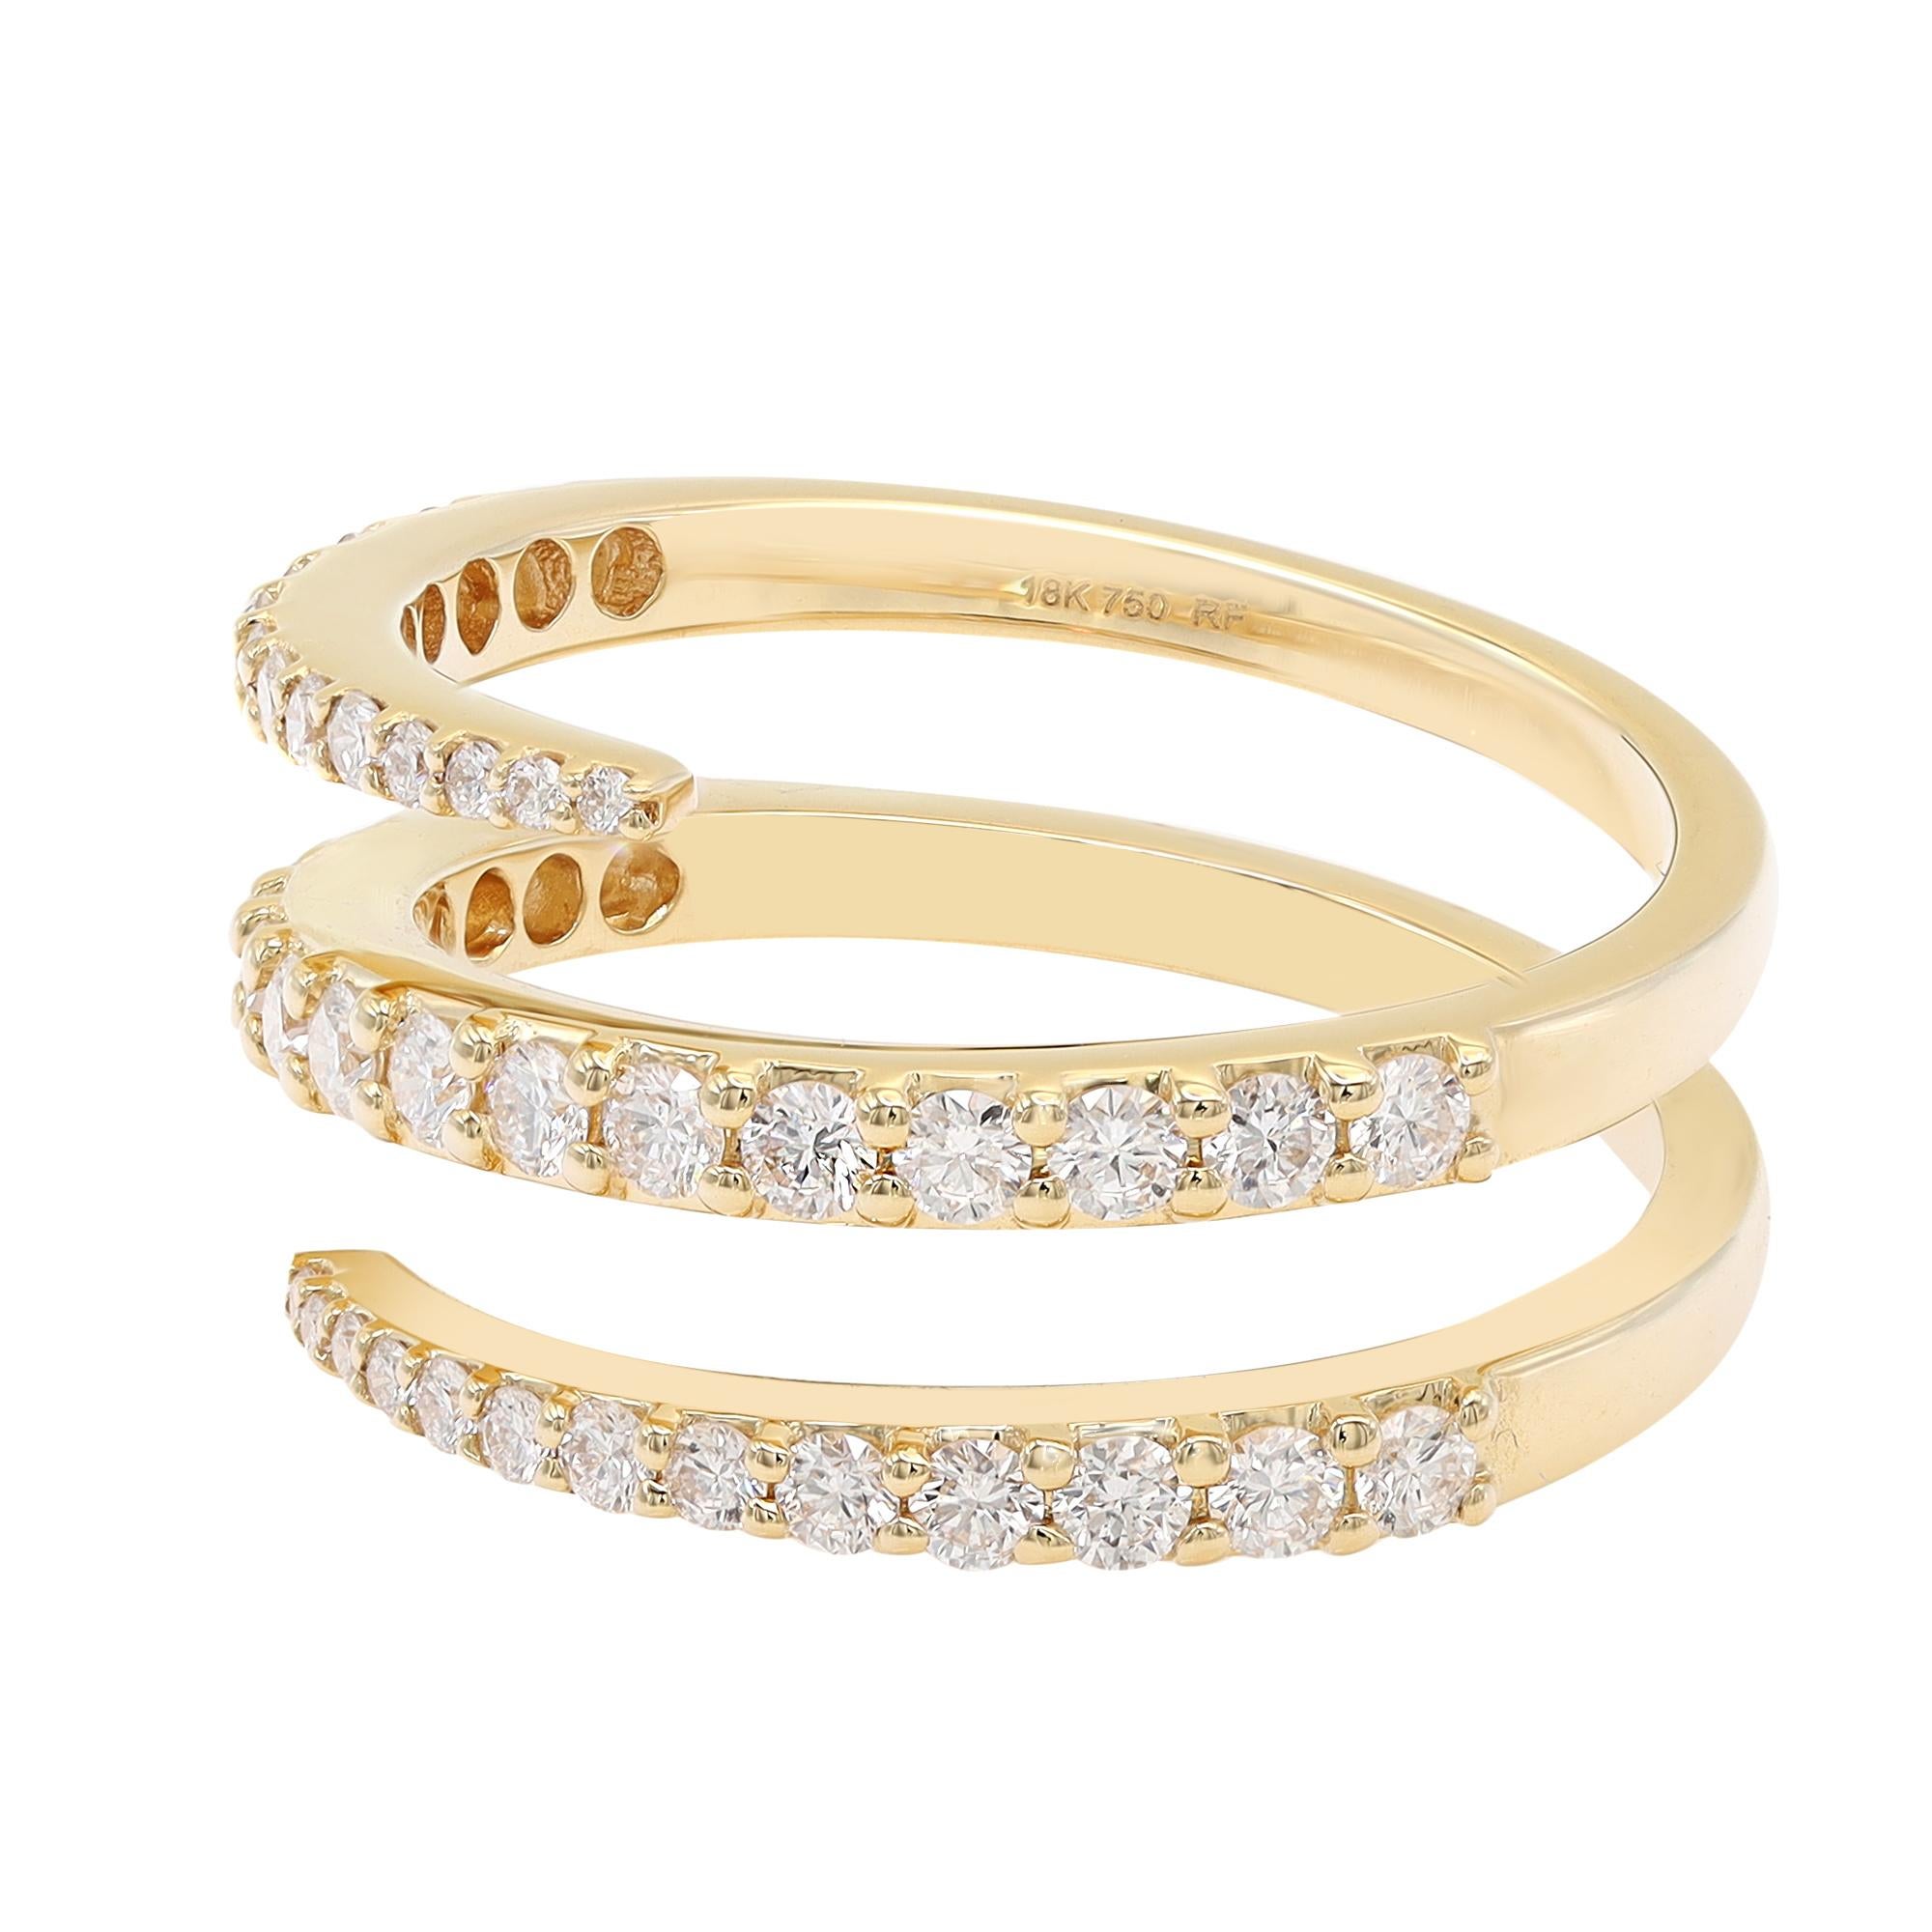 This beautiful spiral diamond ring is all about sparkle. Crafted in high polished 18k yellow gold. This style features multi rows of round cut shimmering diamonds in prong setting. Total diamond weight: 0.76 carat. Diamond quality: G-H color and